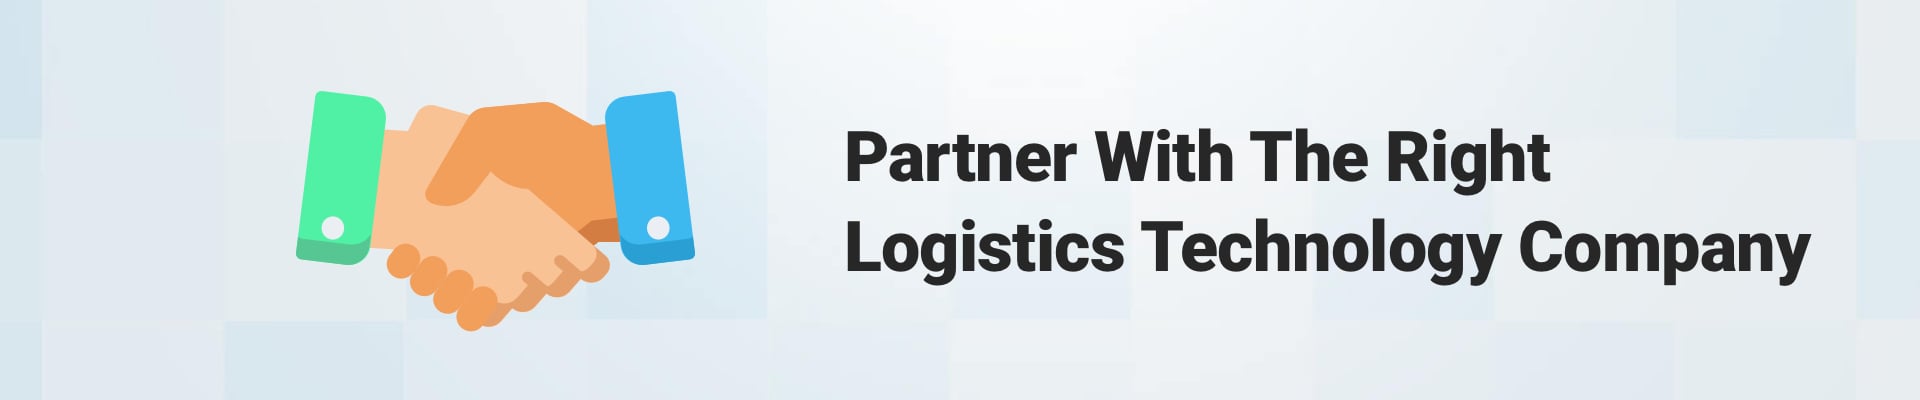 partner with the right logistics technology company